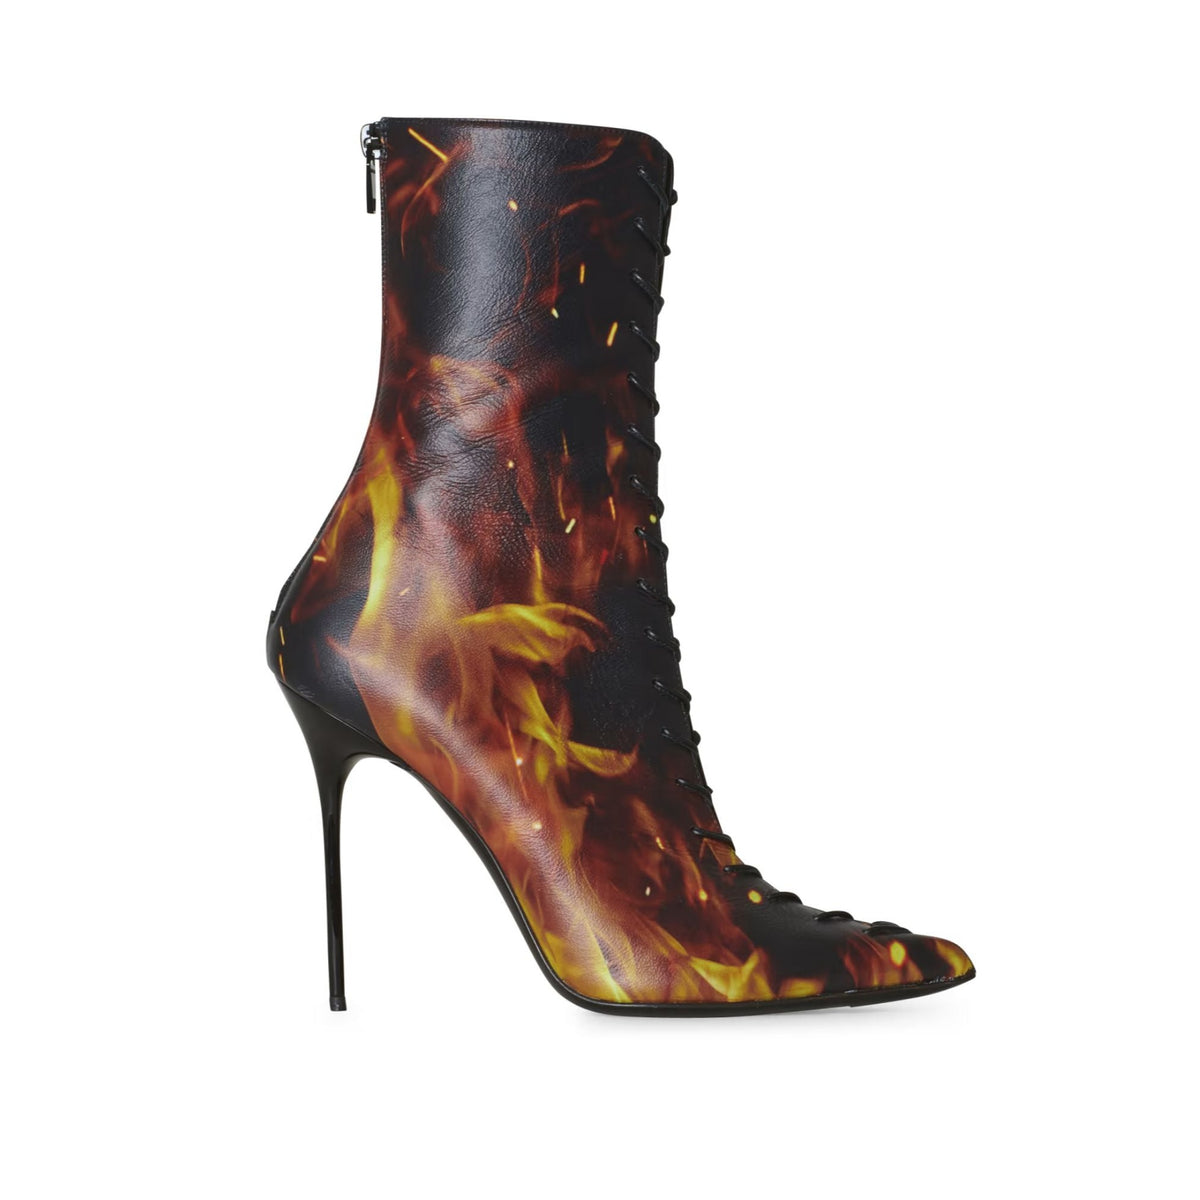 Uria Ankle Boots In Fire Print Leather